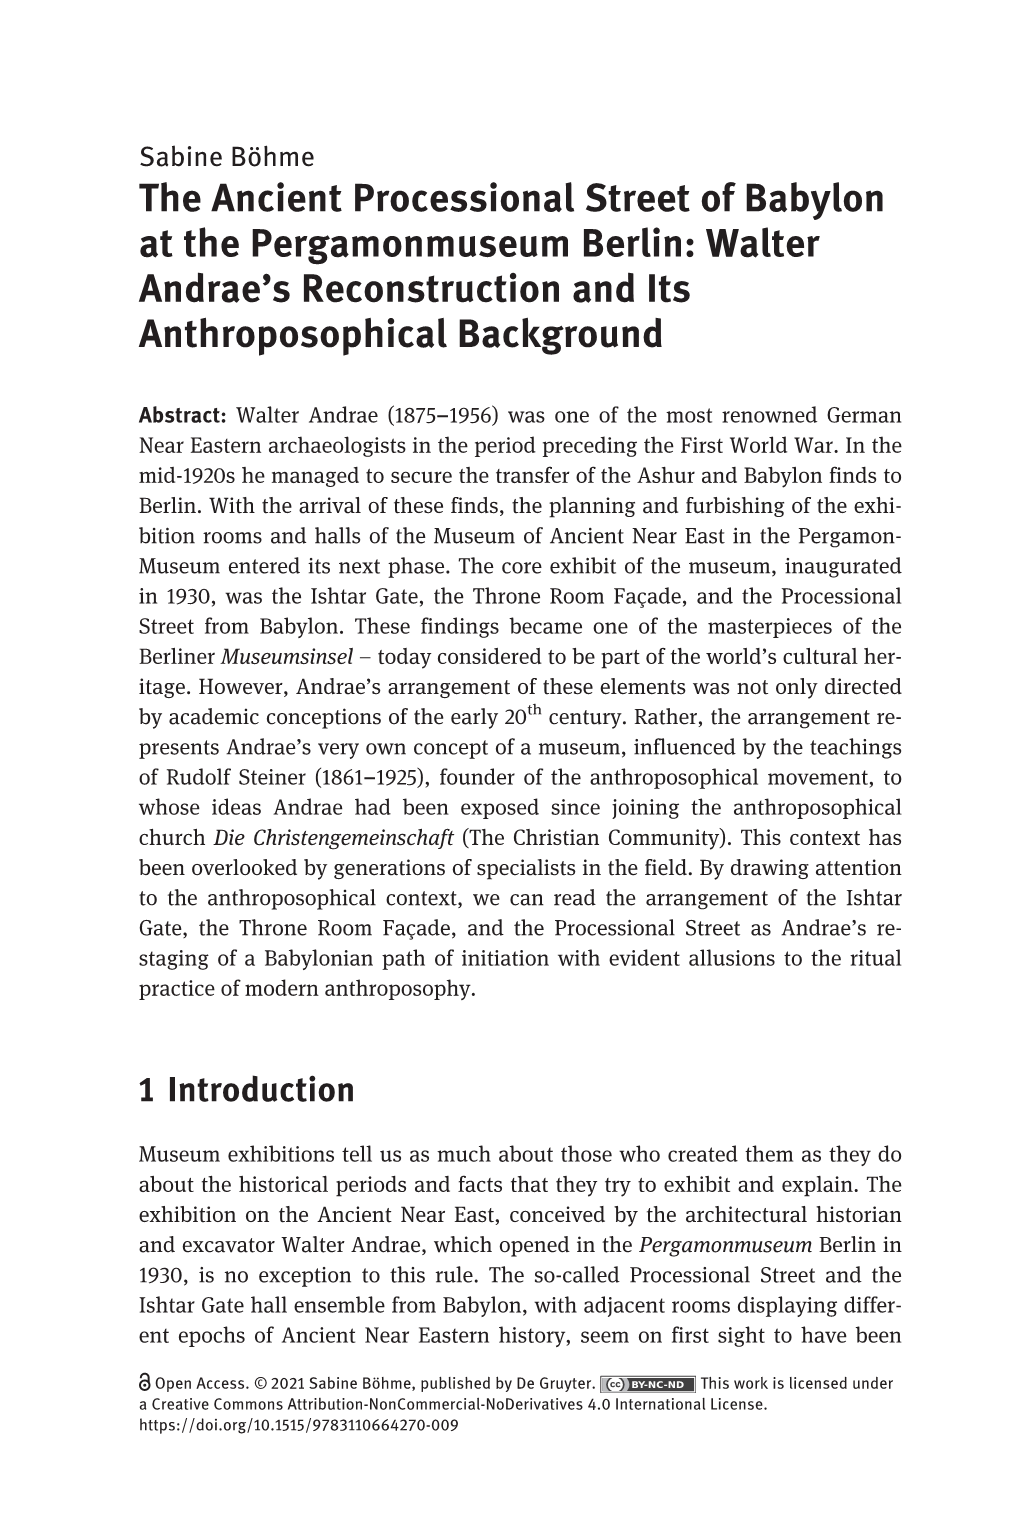 Walter Andrae's Reconstruction and Its Anthroposophical Background